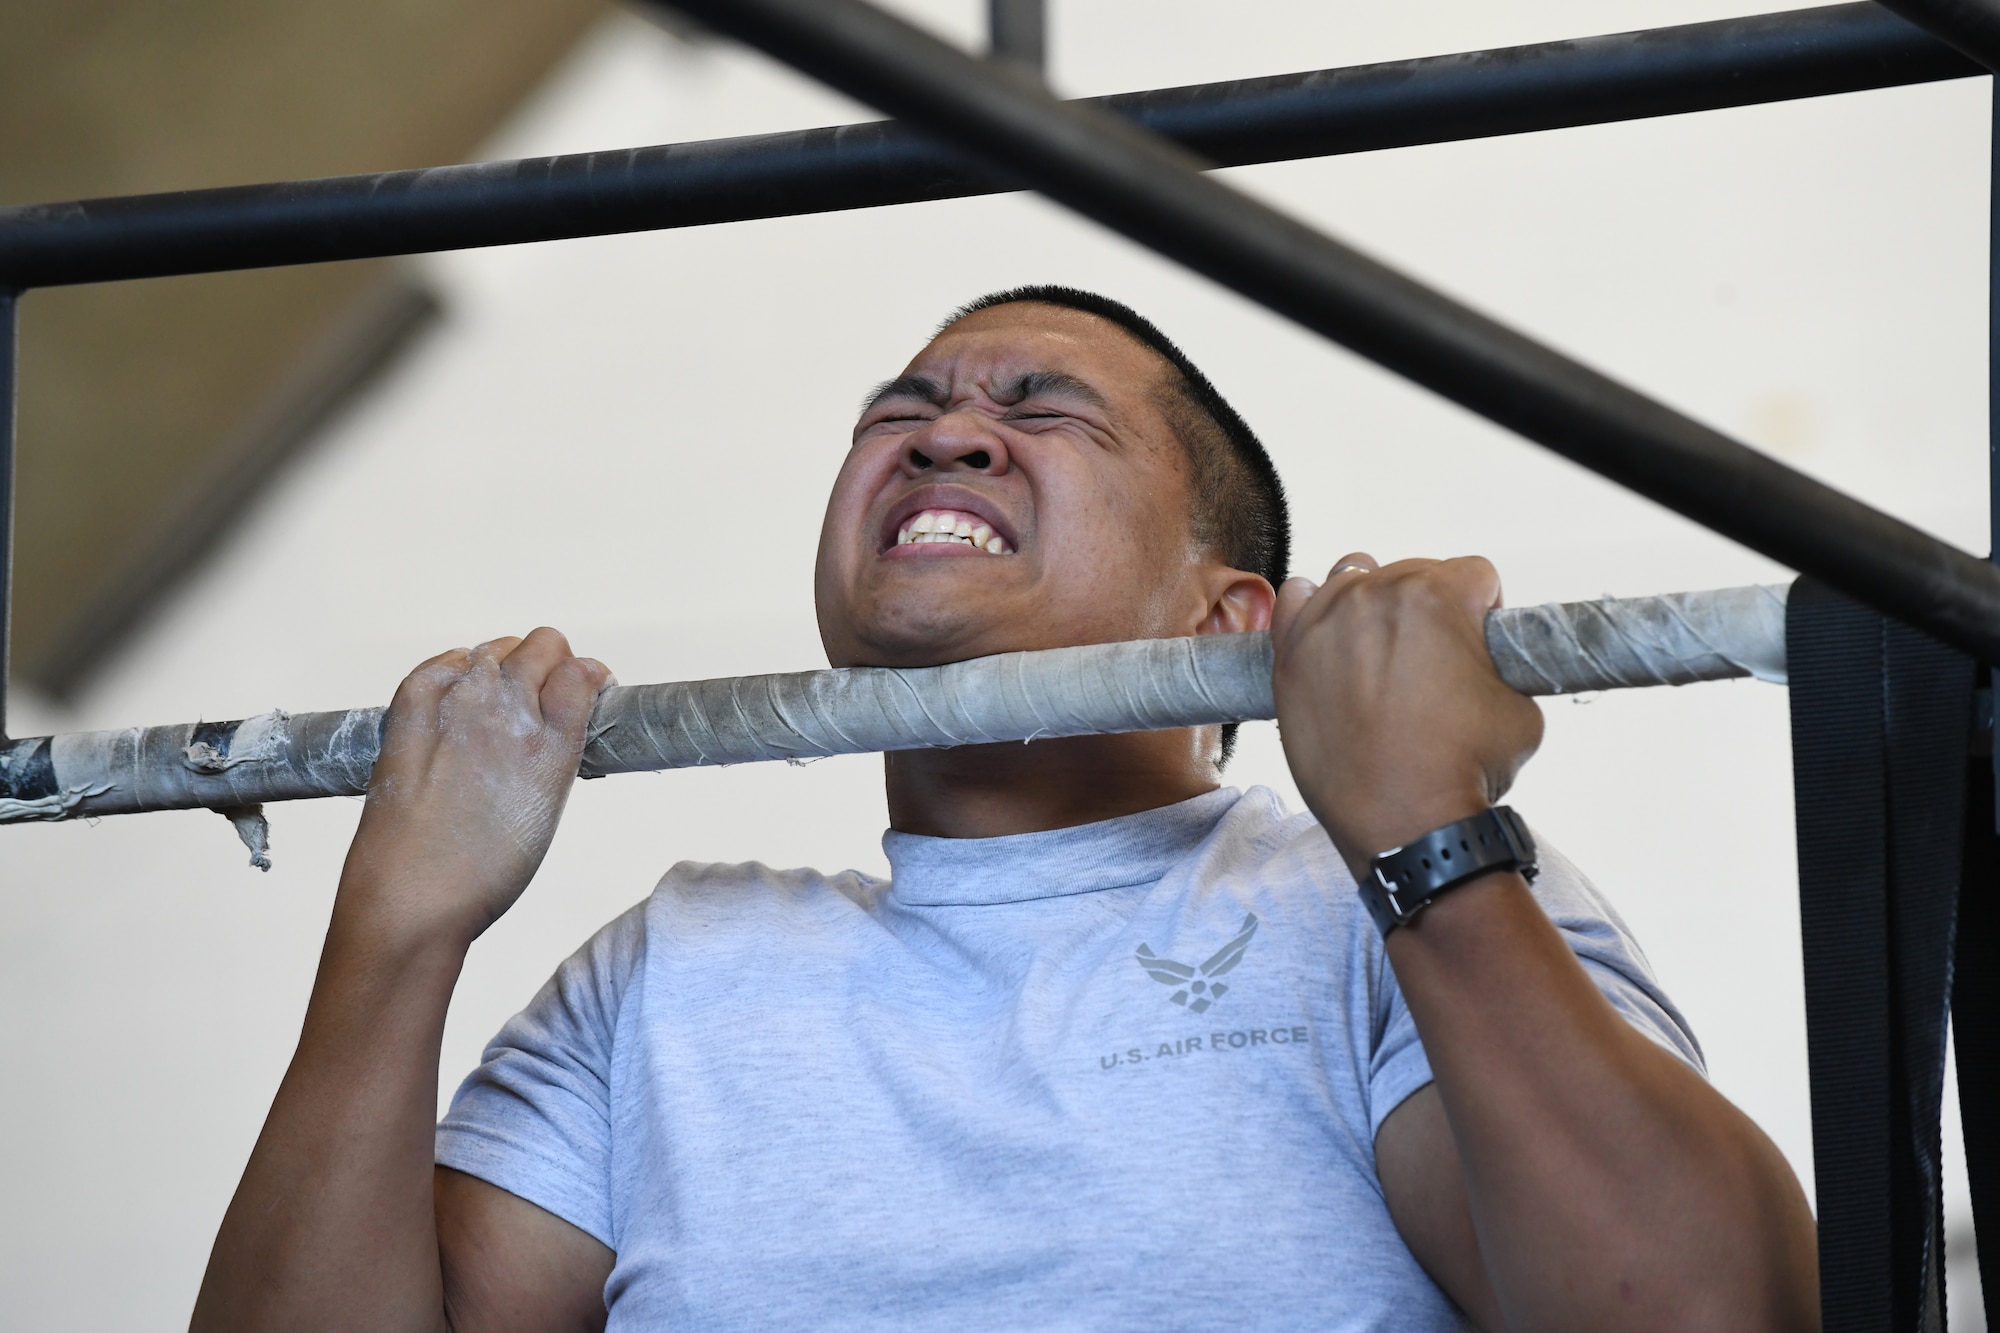 Staff Sgt. Jefferey Sales, a 28th Security Forces Squadron combat arms instructor, performs a flexed arm hang during the German Armed Forces Proficiency Test at Ellsworth Air Force Base, S.D., Sept. 21, 2019. Eleven Raider Airmen participated in the GAFP alongside Army ROTC cadets and South Dakota Army National Guardsmen. Participants were required to complete six events in order to qualify for the coveted German Armed Forces Proficiency Badge. (U.S. Air Force Airman 1st Class Christina Bennett)